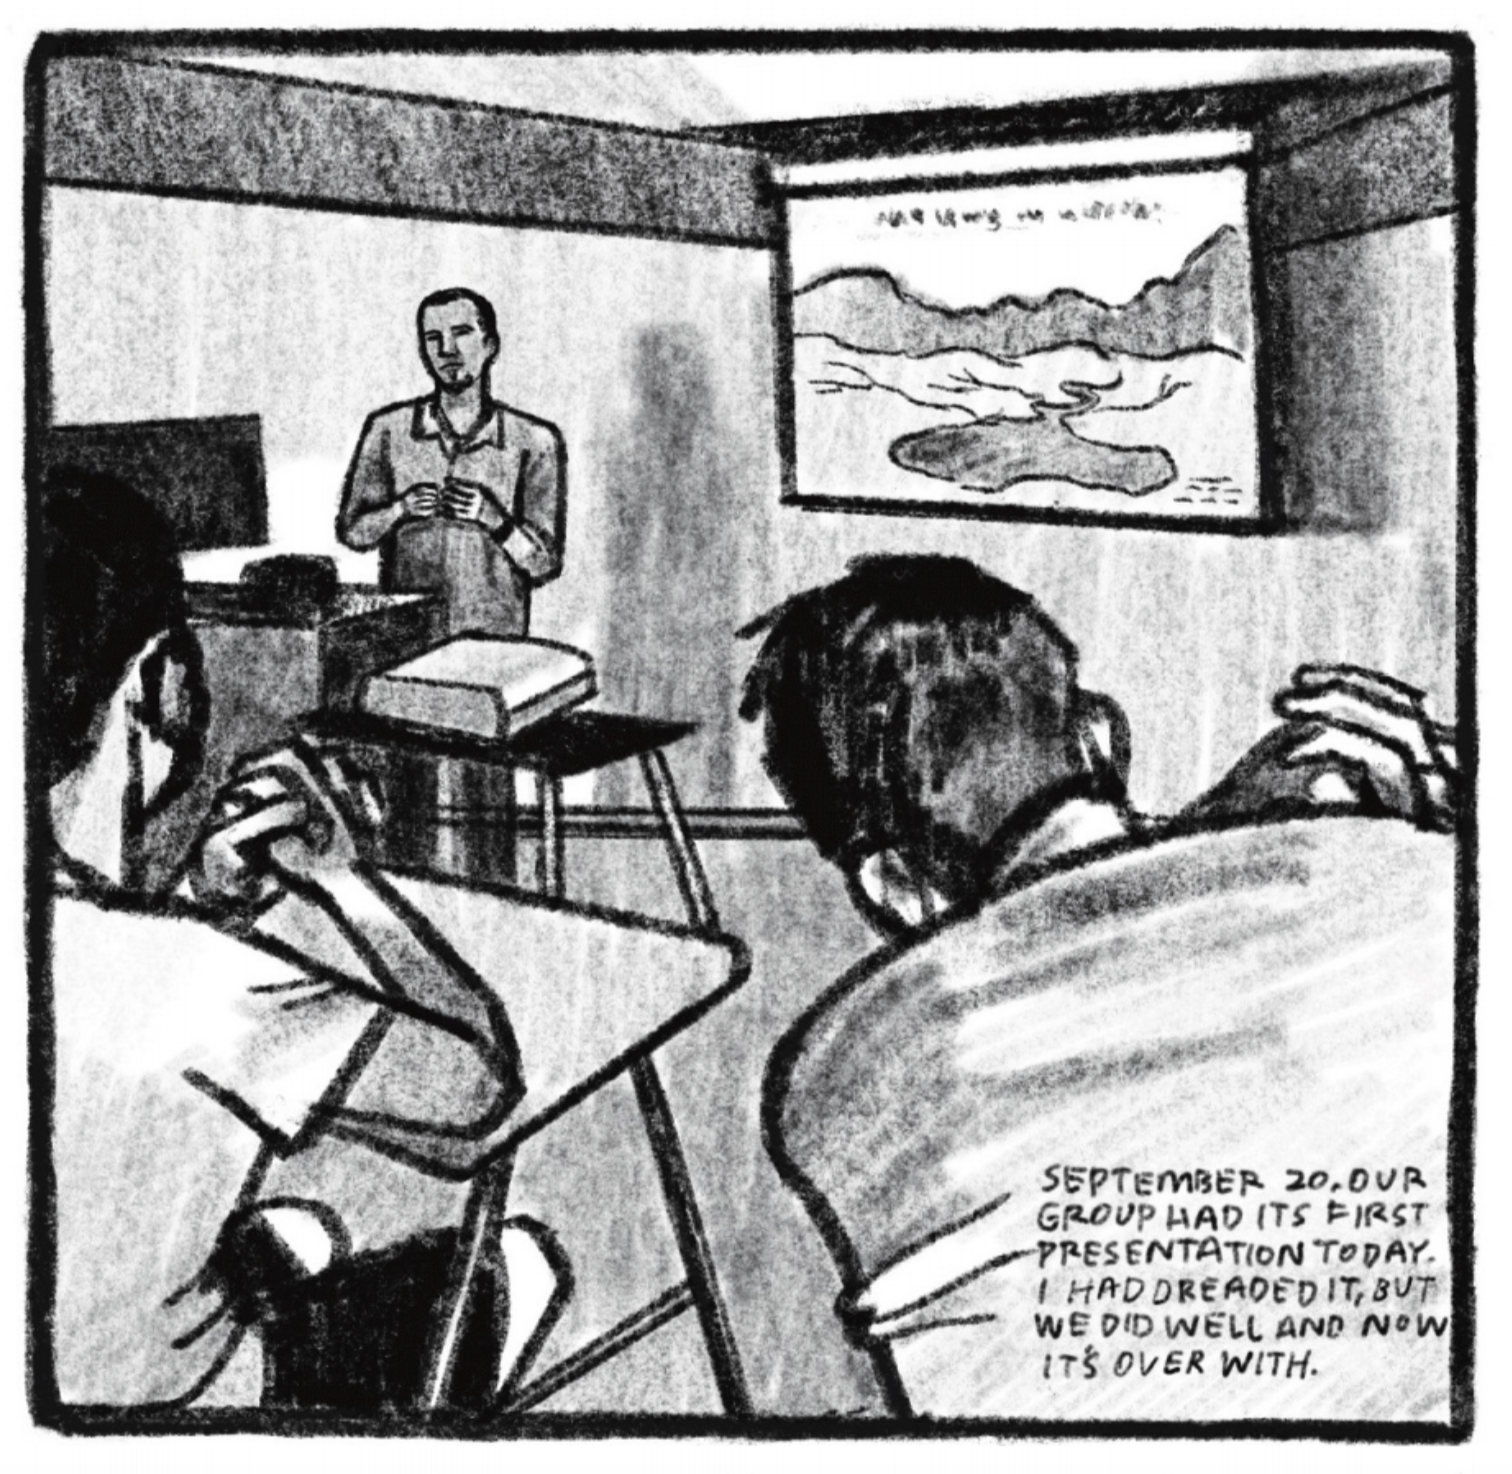 A view of a classroom from Kimâ€™s perspective. A man with a goatee wearing a button down shirt stands behind a podium with a desktop computer, speaking to the glass. There is a projector on a stool in front of him, displaying an image of a rocky formation and body of water on the screen on the back wall. Two men sit in the desks in front of Kim, leaning in and listening. â€œSeptember 20. Our group had its first presentation today. I had dreaded it, but we did well and now itâ€™s over with.â€